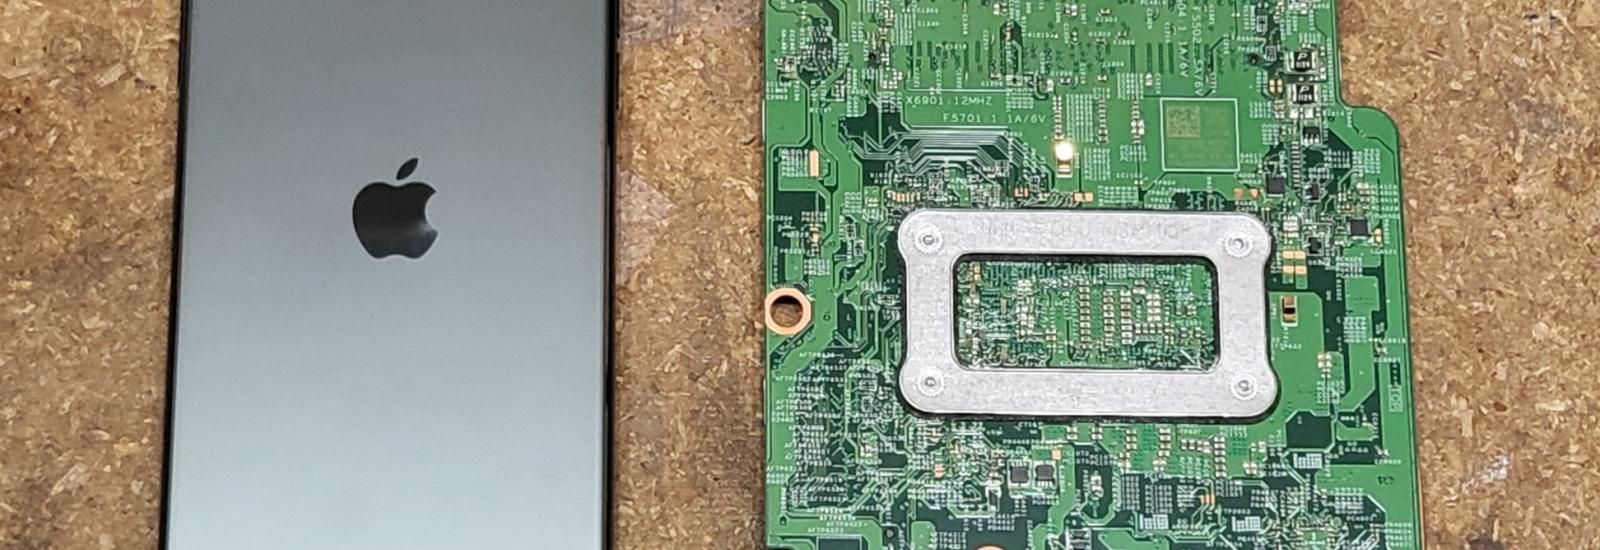 iPhone 11 Pro Max next to Dell Laptop Motherboard